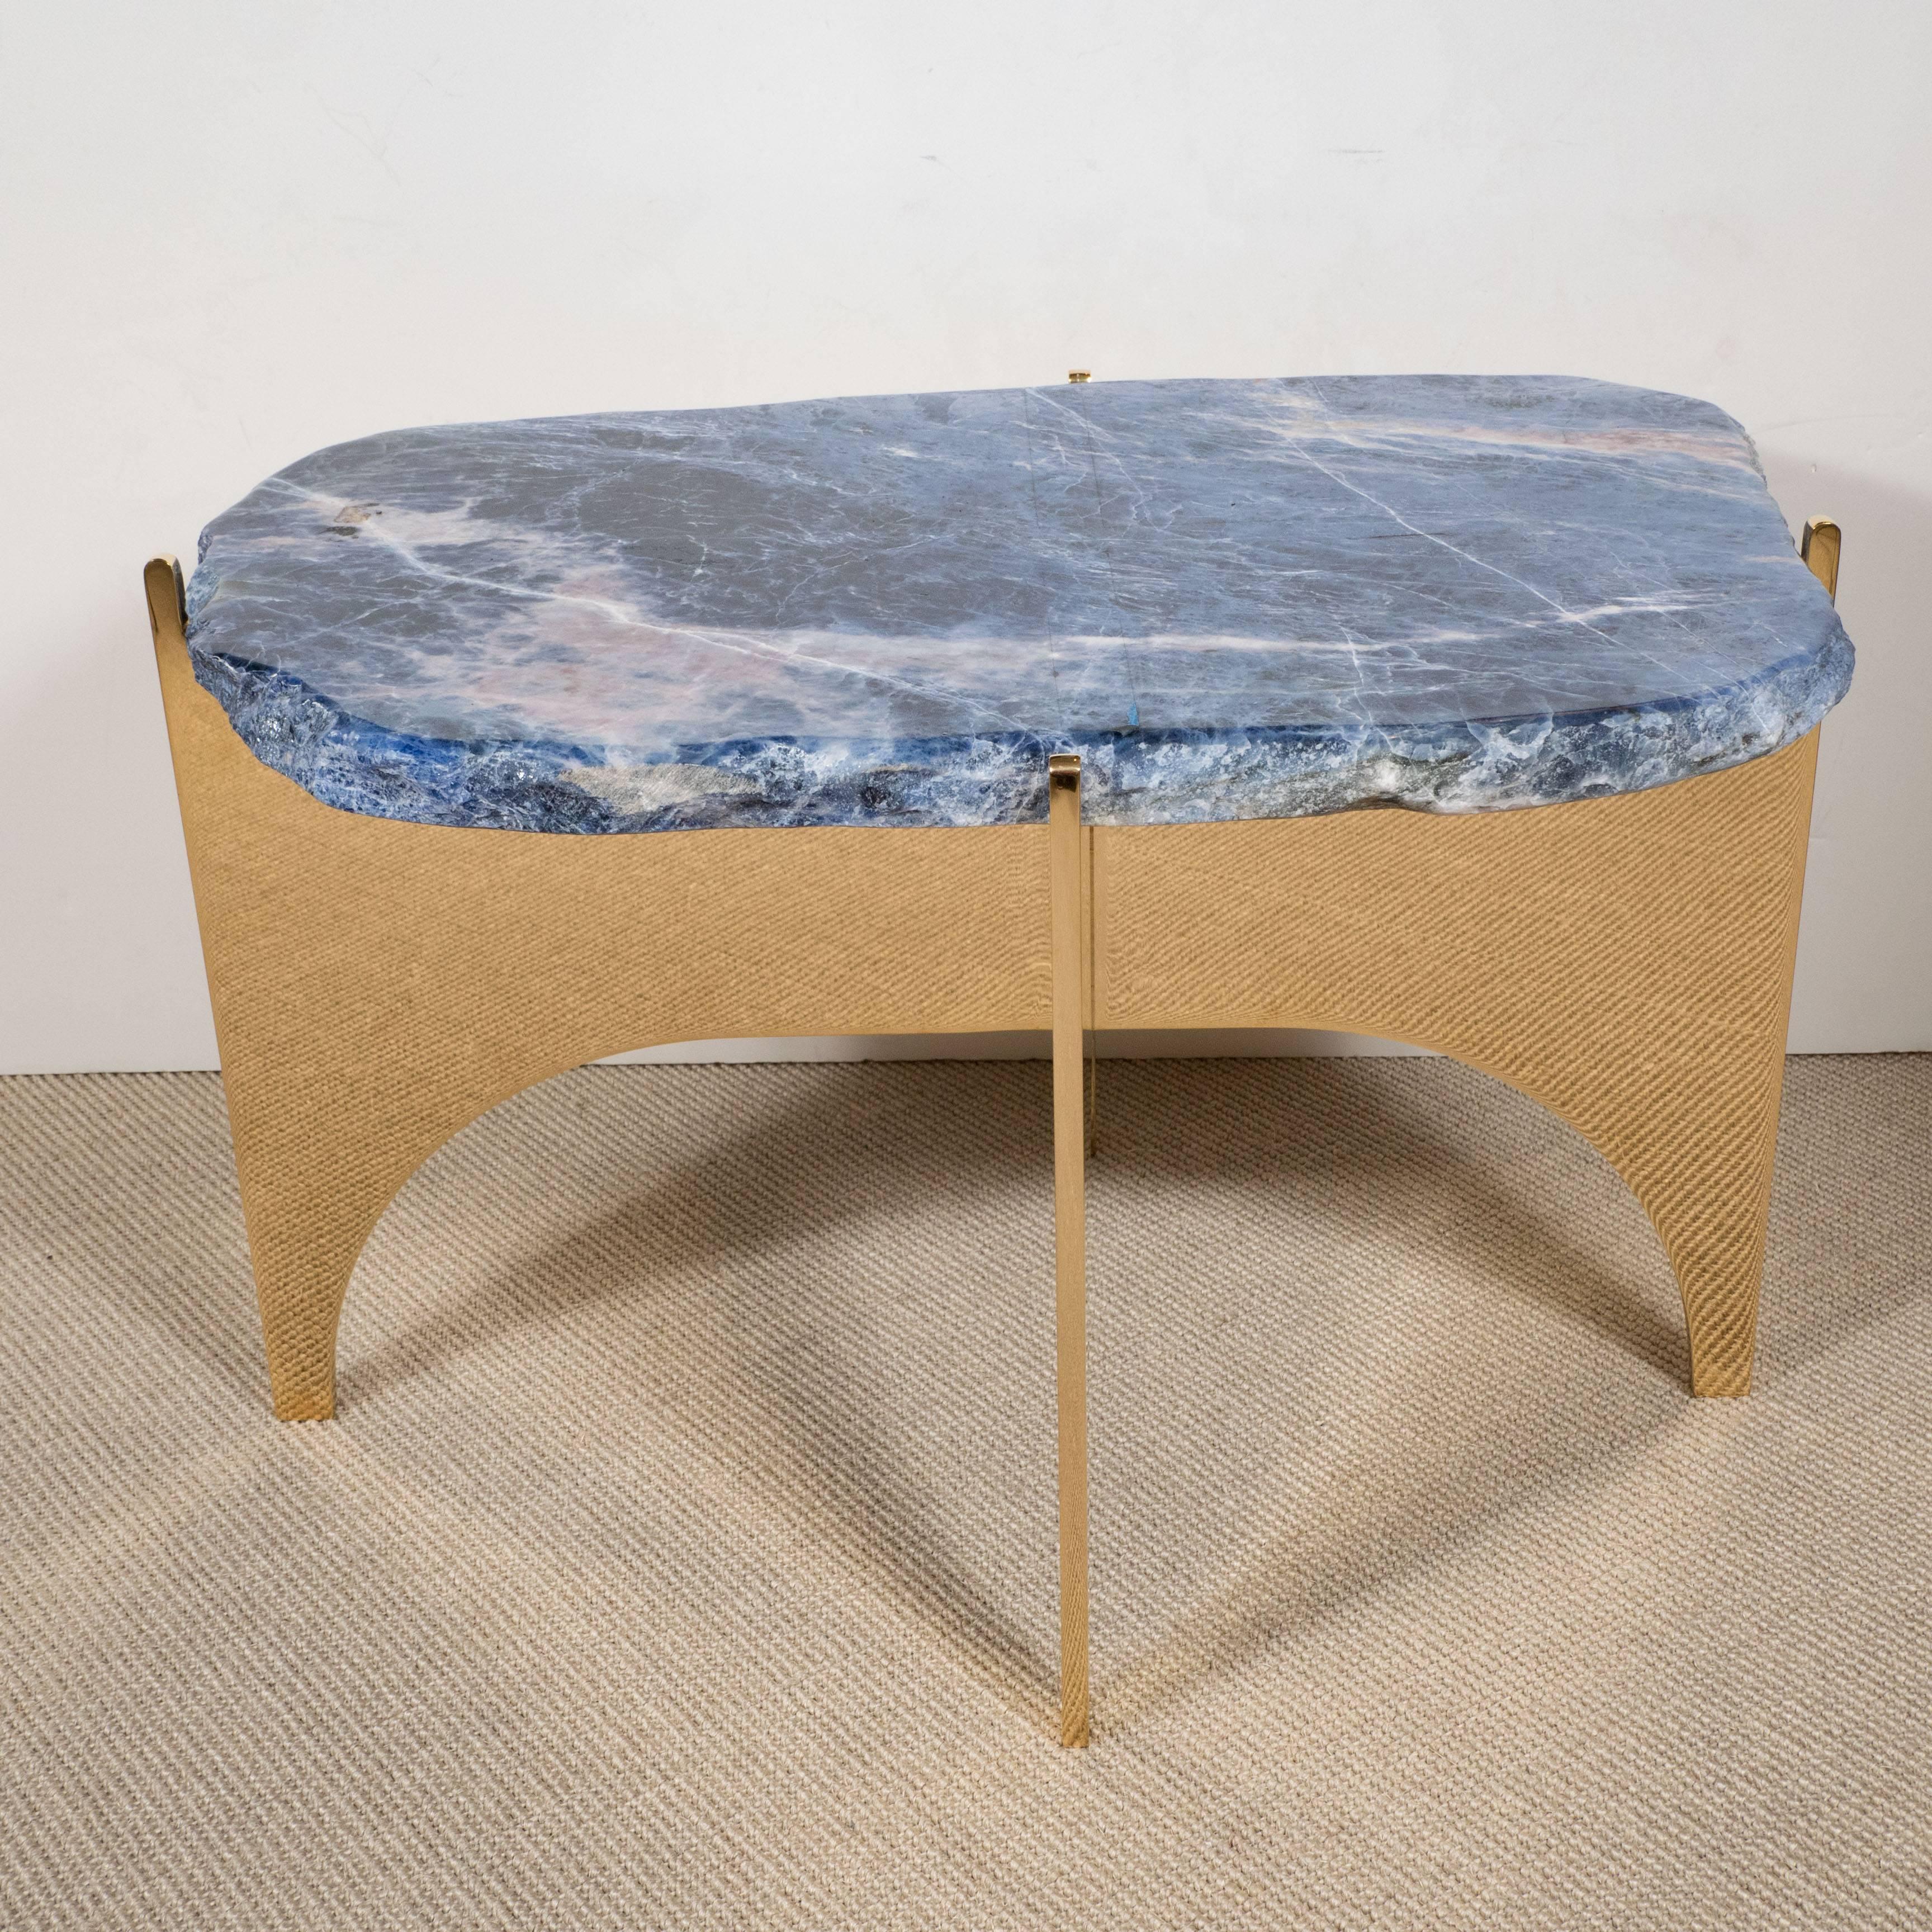 American Sodalight Gemstone Top Table with Mirror Polished Bronze Base For Sale